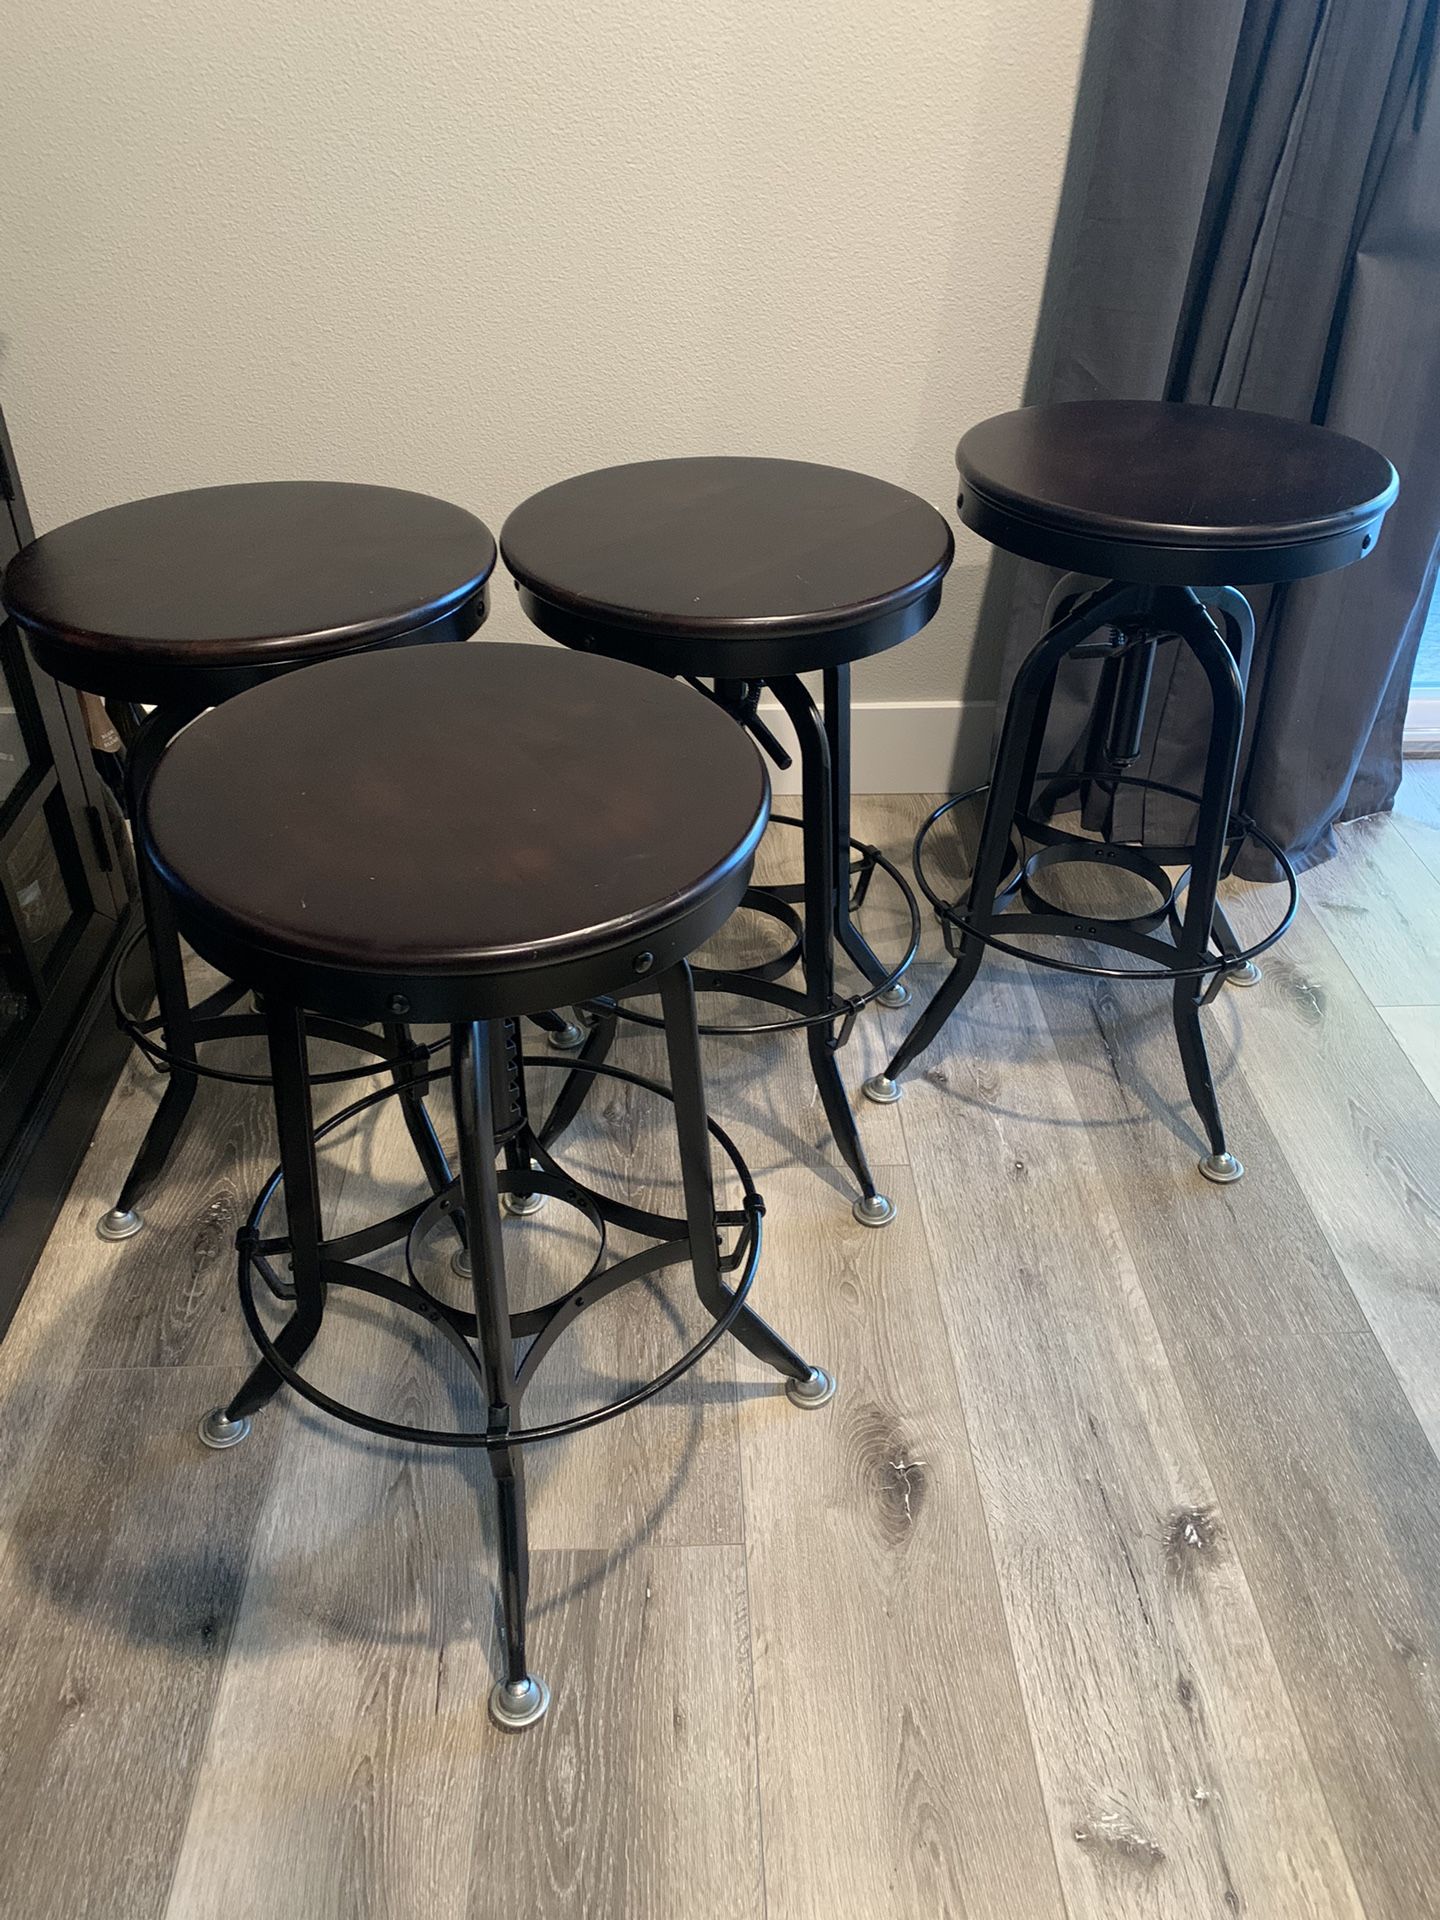 4 Counter Height Stools